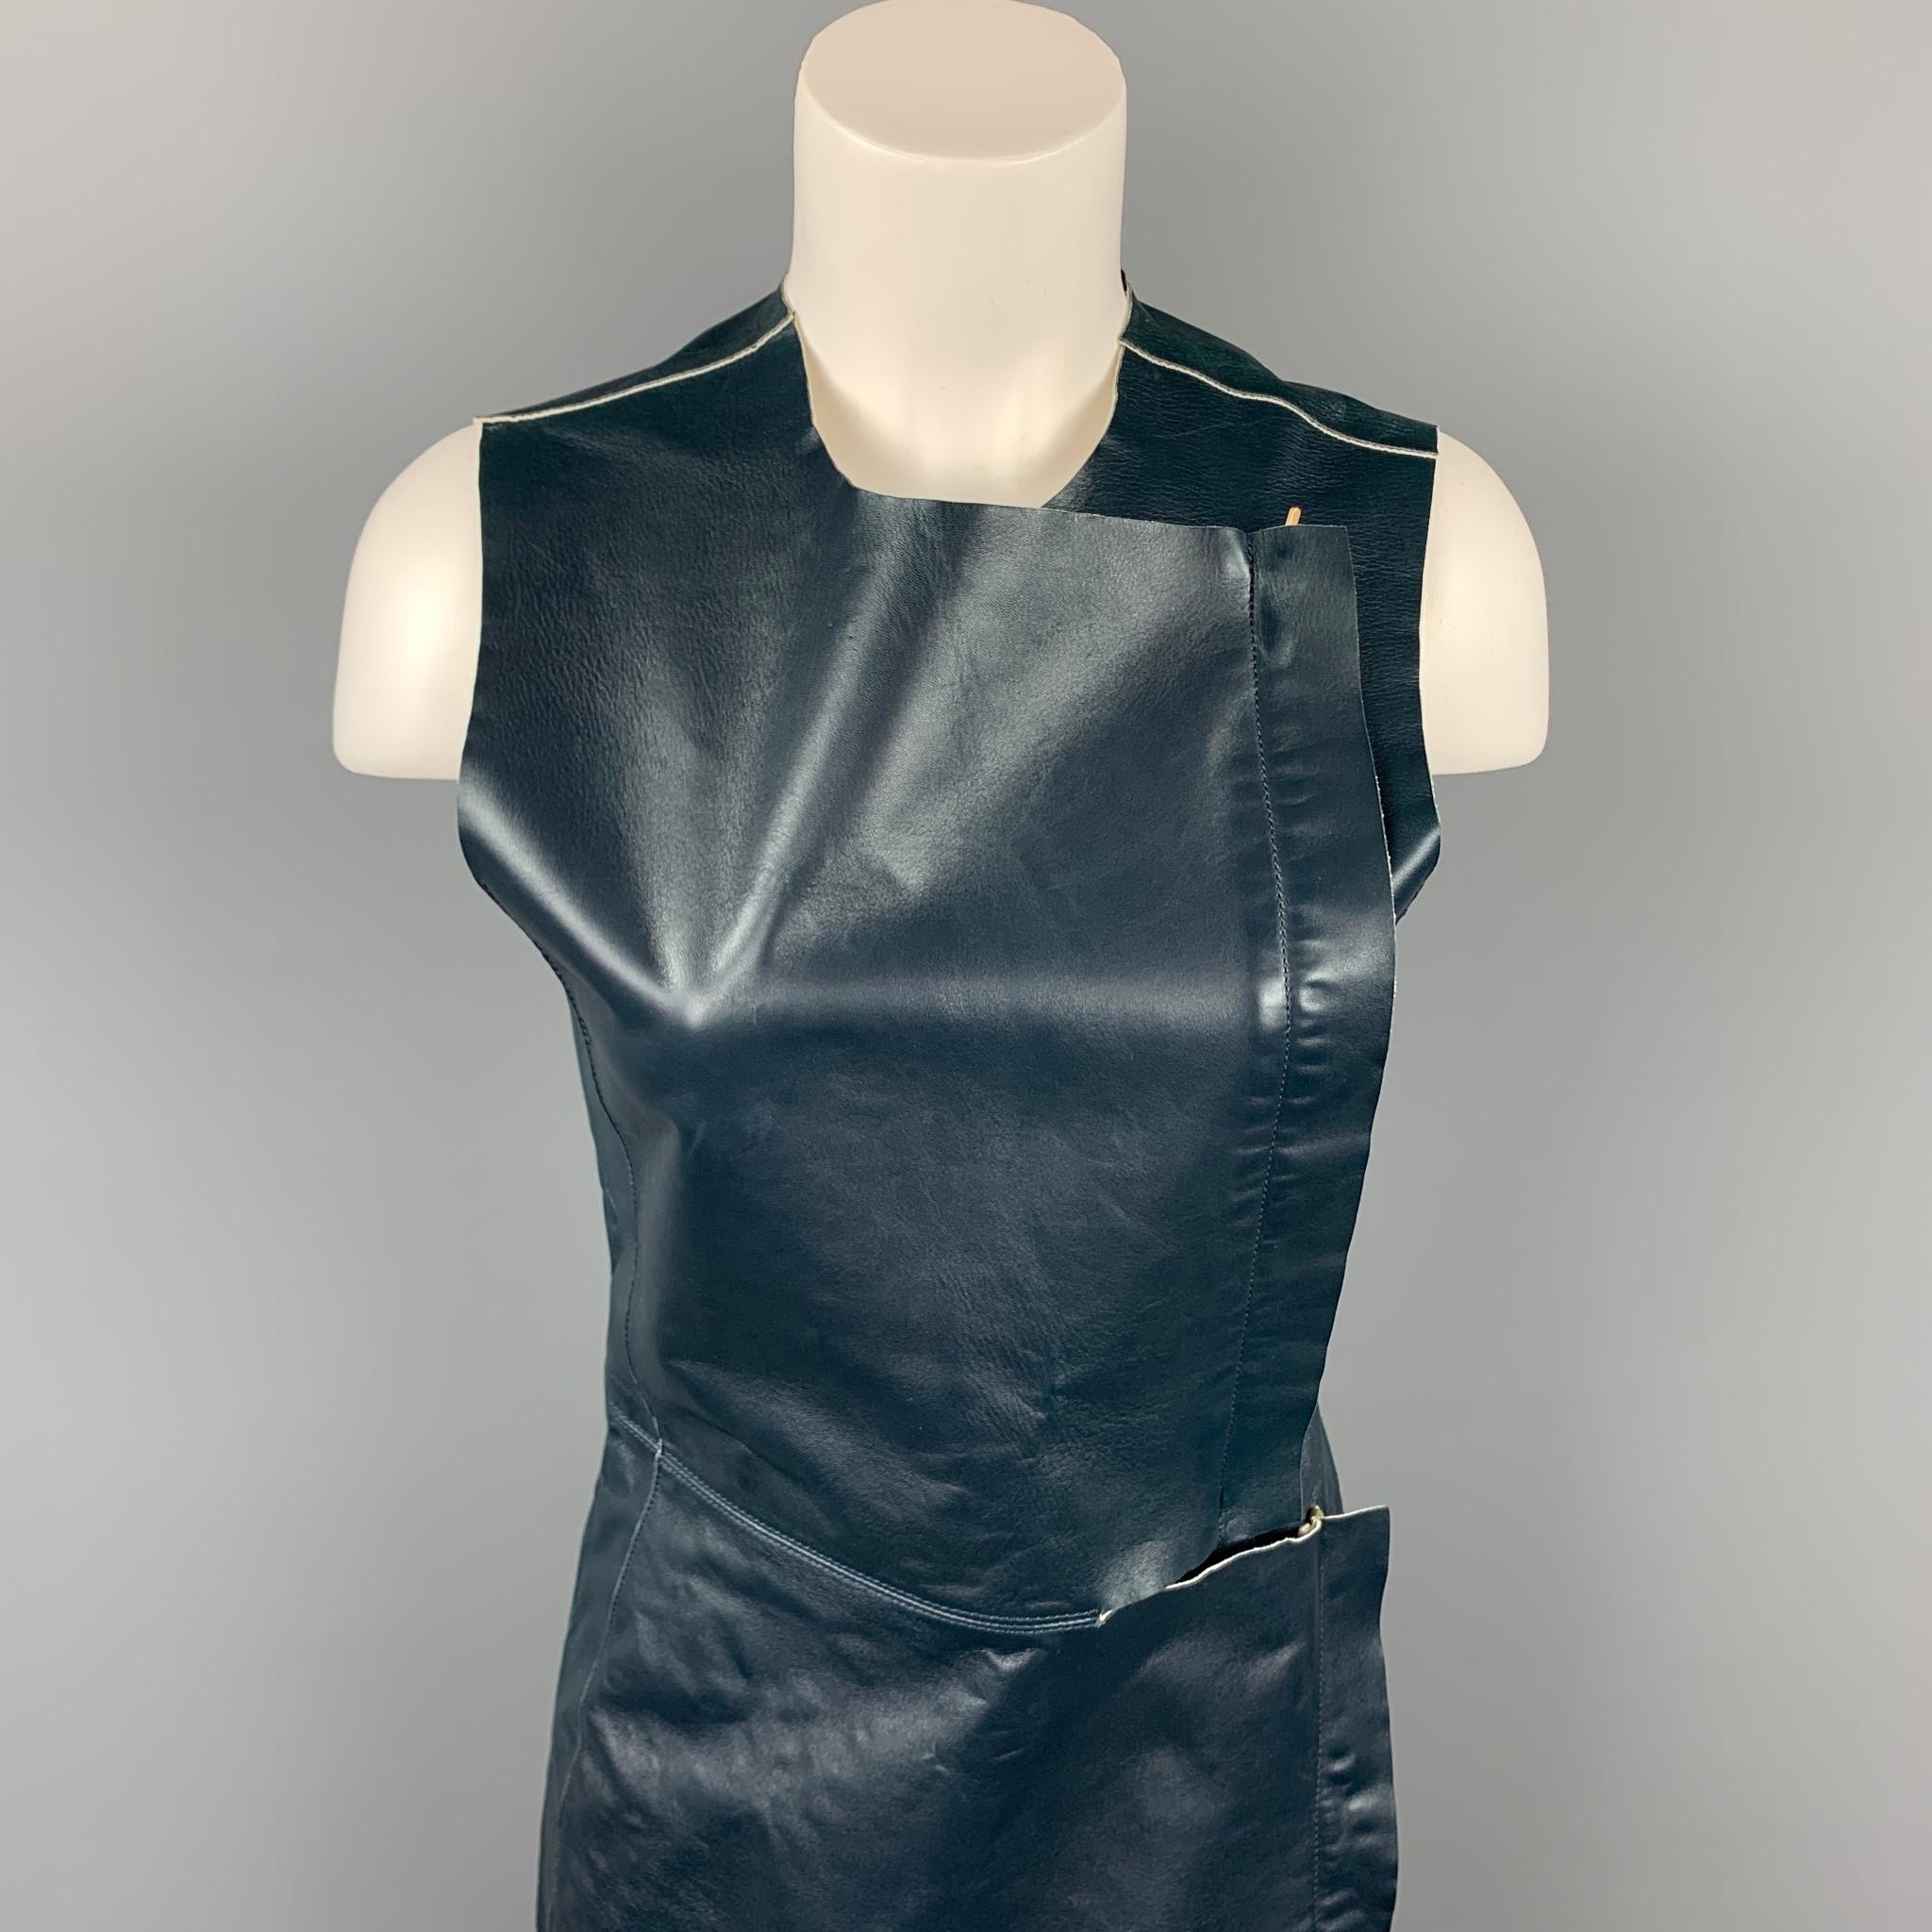 CALVIN KLEIN COLLECTION dress comes in a dark blue leather featuring a sheath style and zipper closure details. Made in Italy.

New With Tags.
Marked:

Measurements:

Bust: 30 in.
Waist: 28 in.
Hip: 34 in.
Length: 33 in.